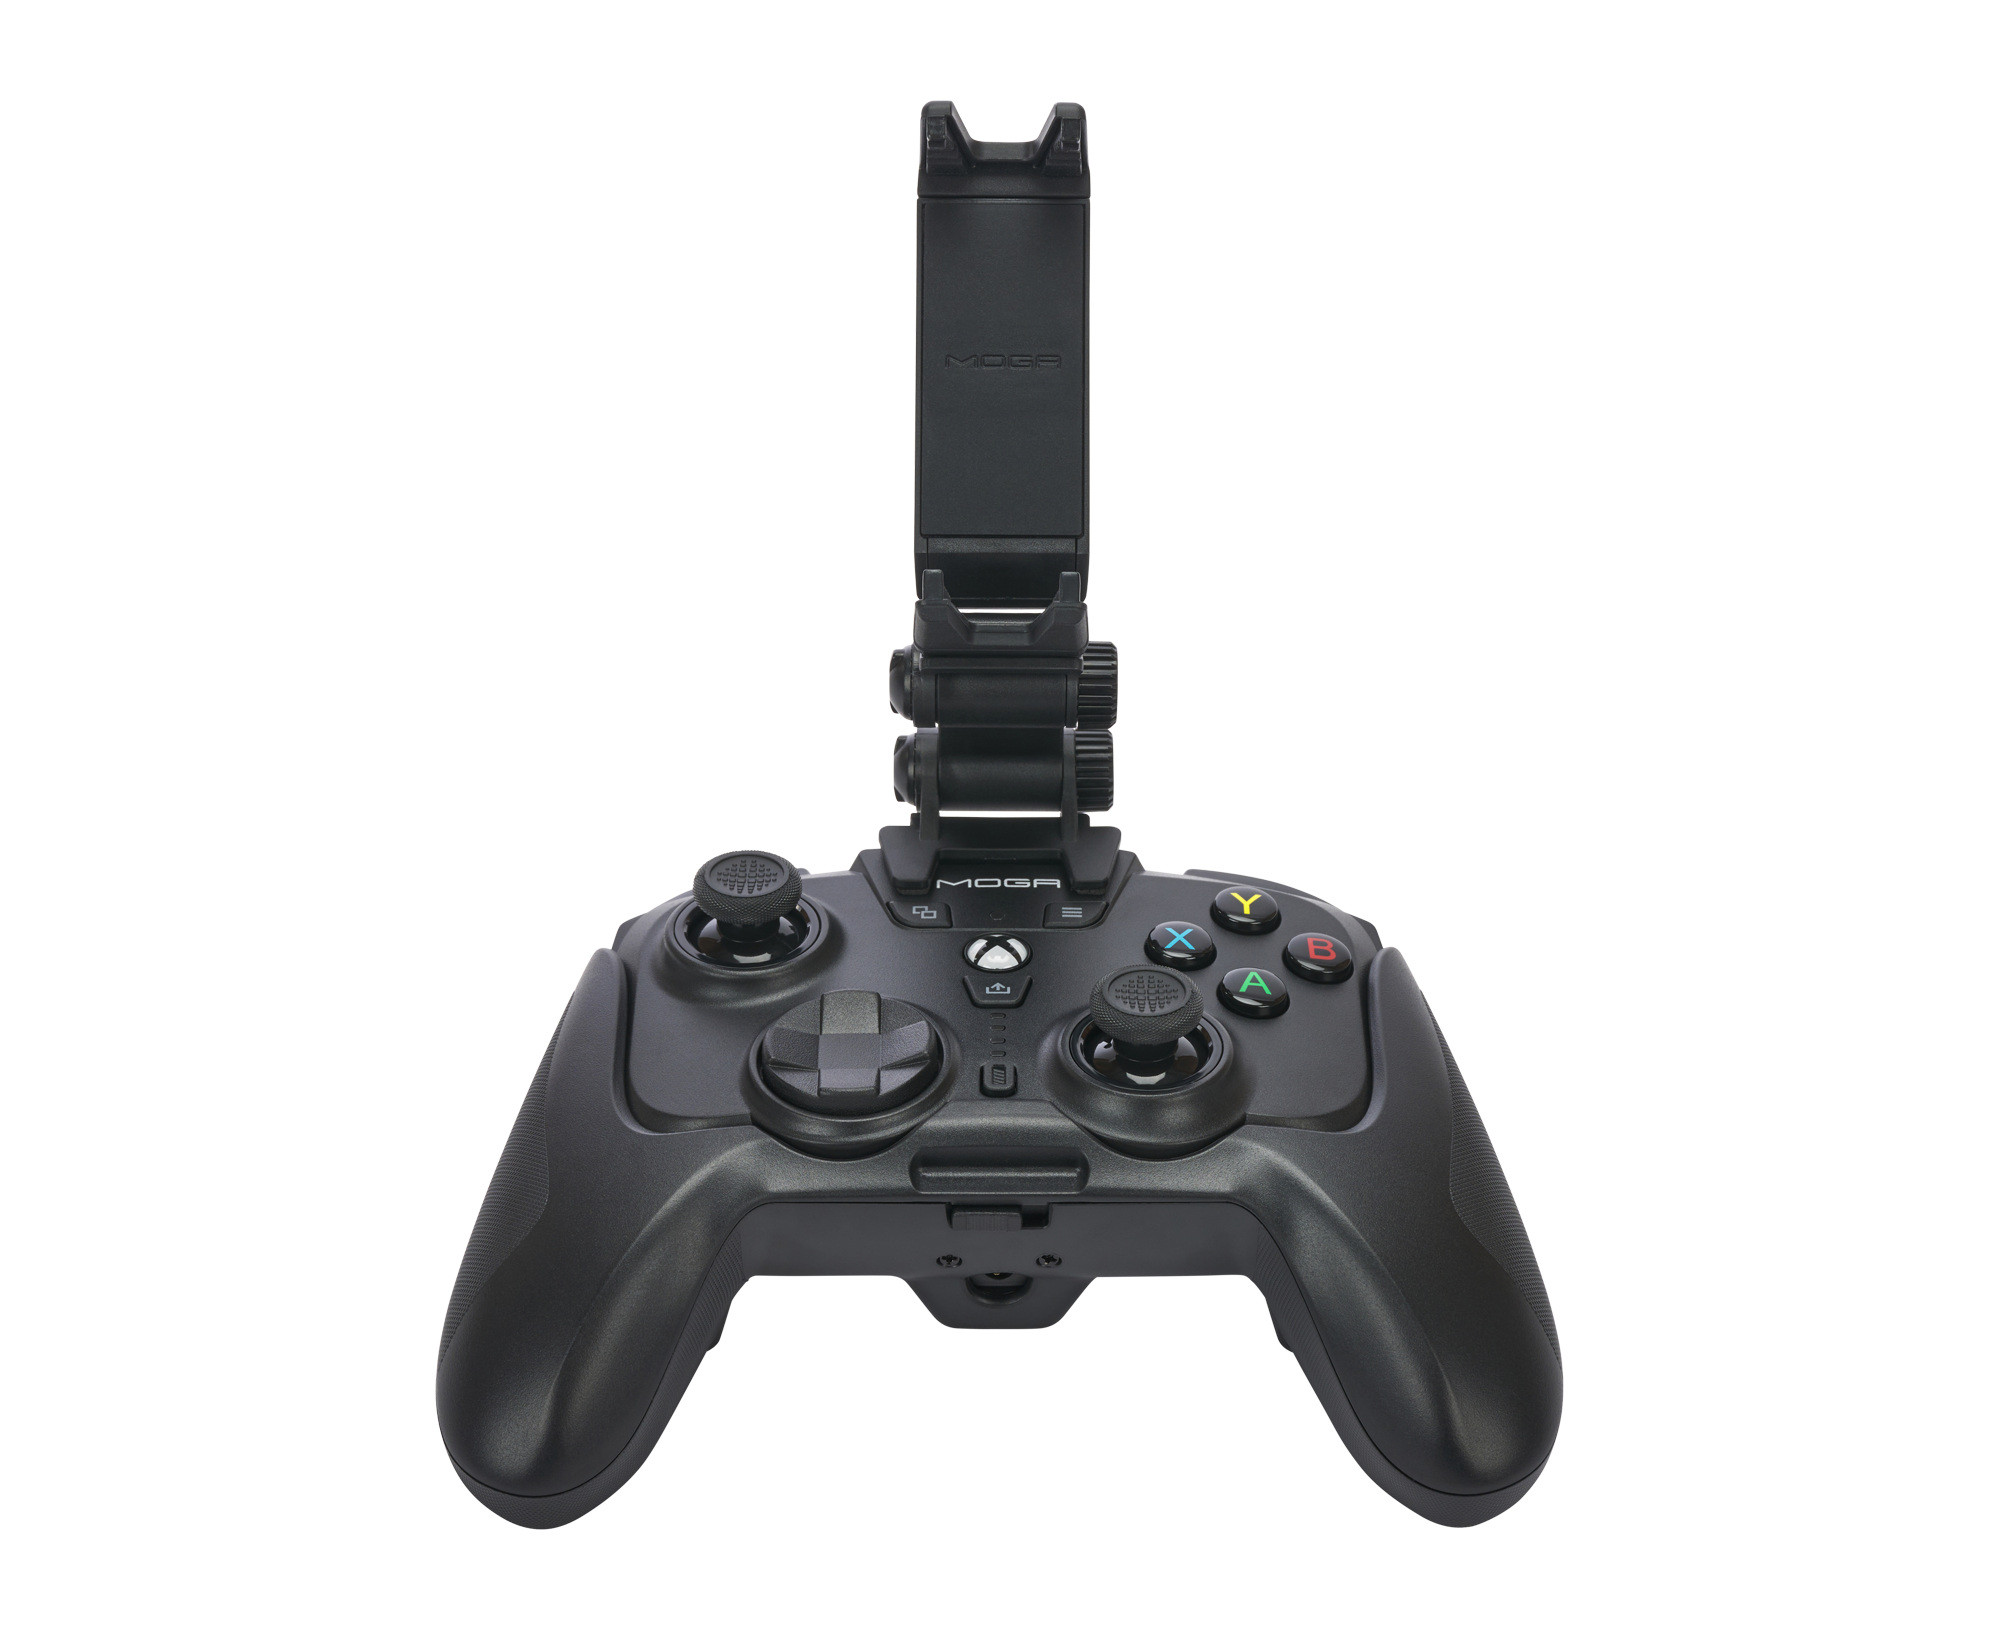 PowerA MOGA XP-ULTRA Wireless Cloud Gaming Controller for Xbox, PC, and Android